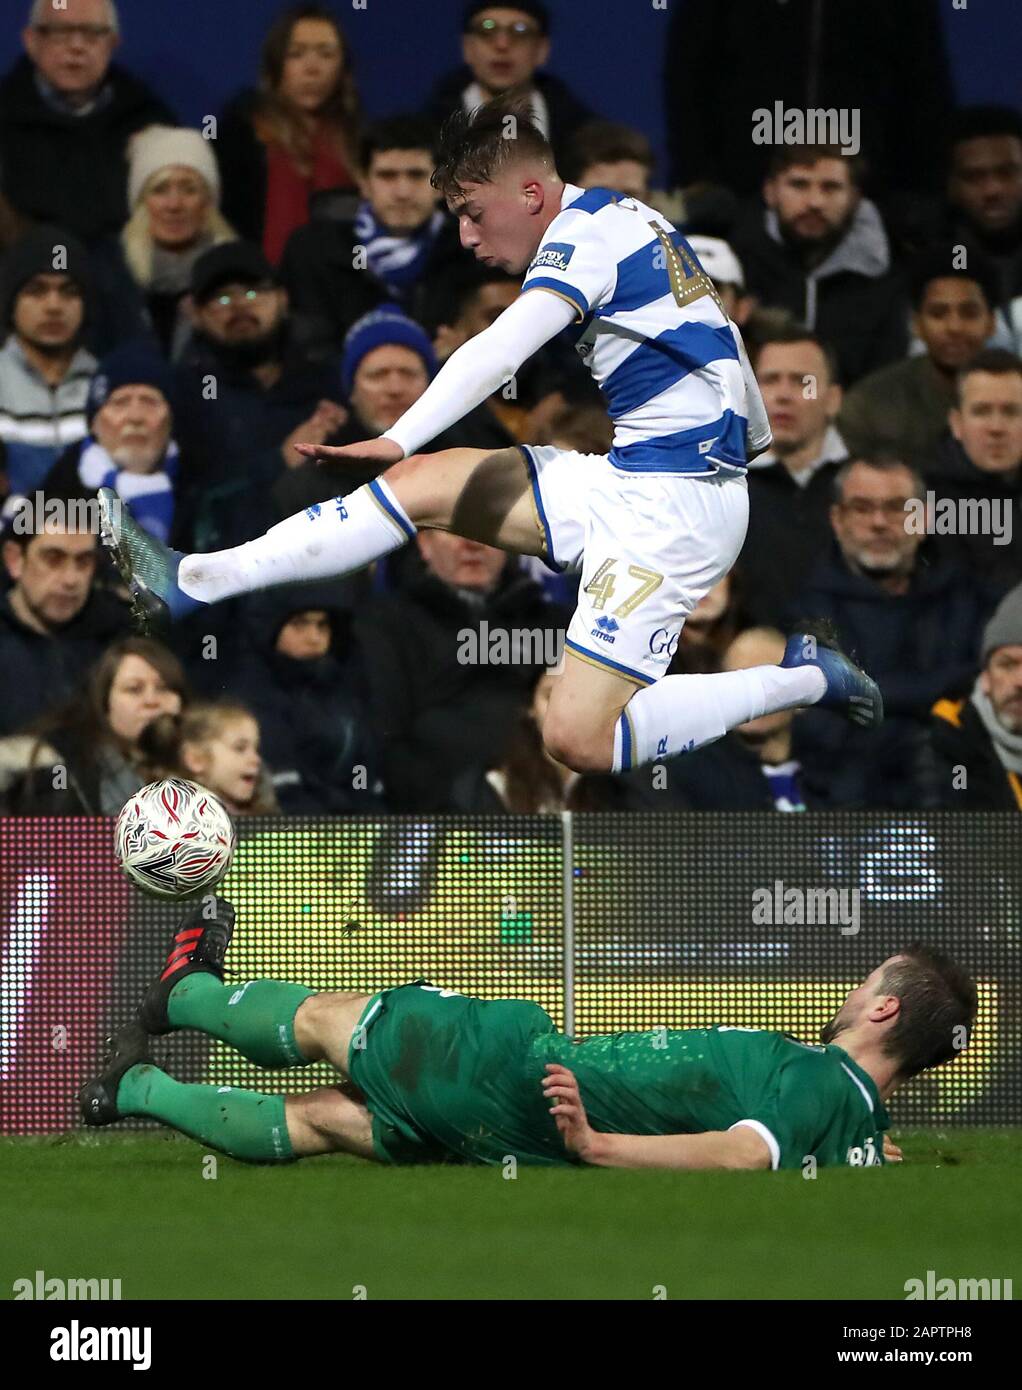 Queens Park Rangers' Jack Clarke (top) and Sheffield Wednesday's Julian Borner battle for the ball during the FA Cup fourth round match at Loftus Road, London. Stock Photo